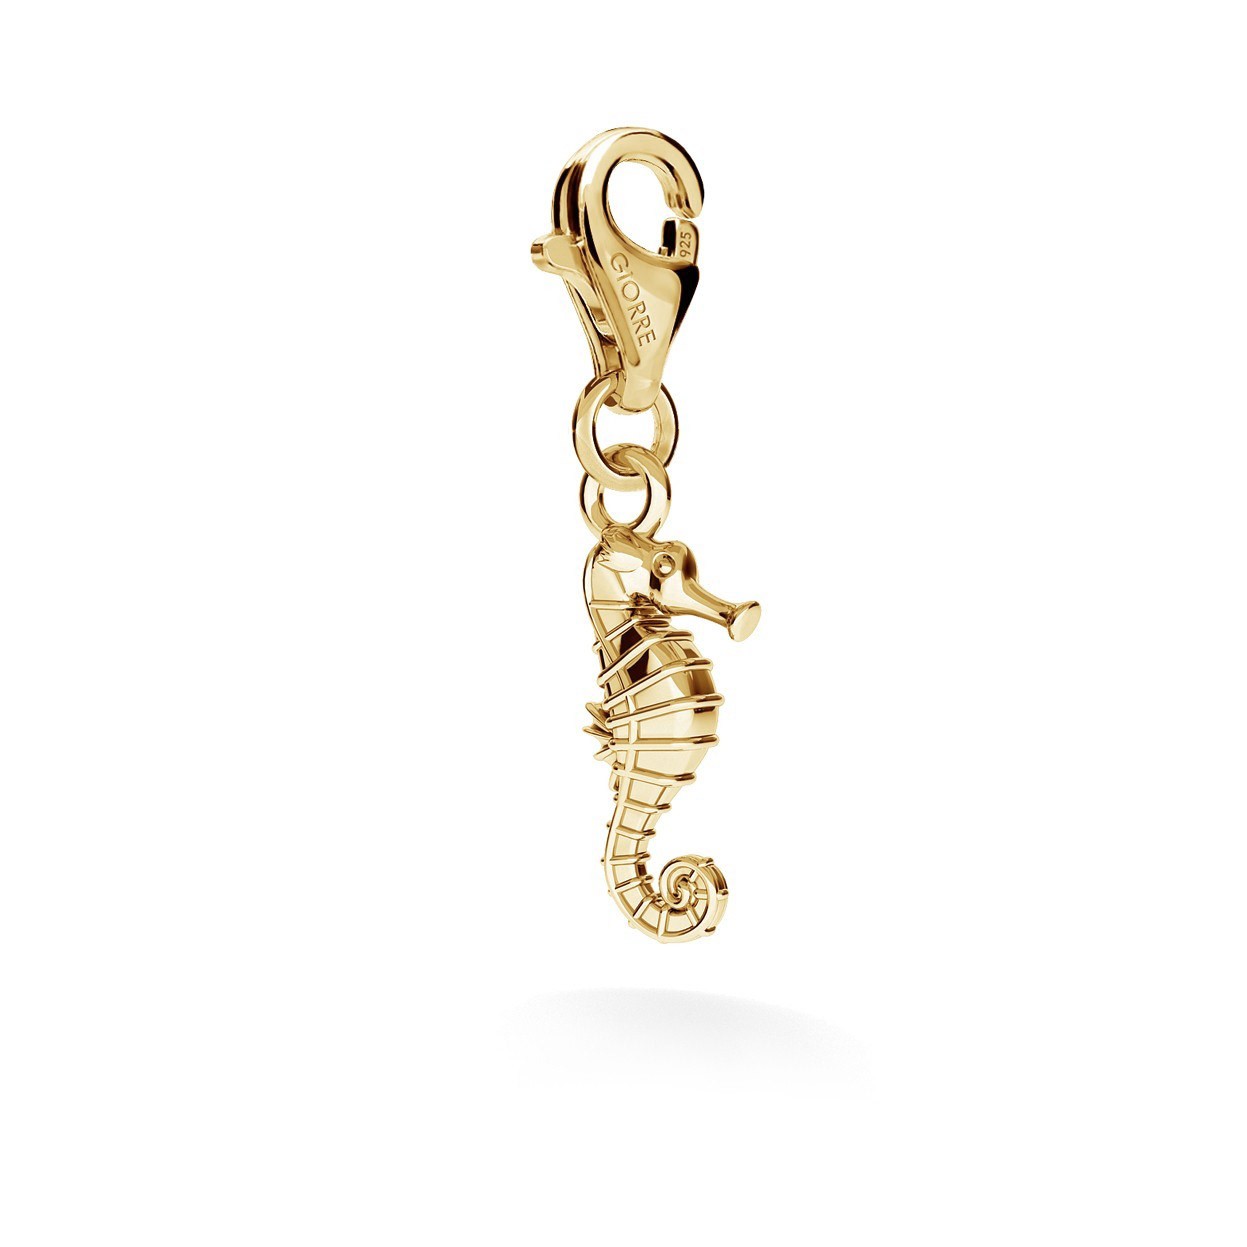 CHARM 136, SEAHORSE, STERLING SILVER (925) RHODIUM OR GOLD PLATED